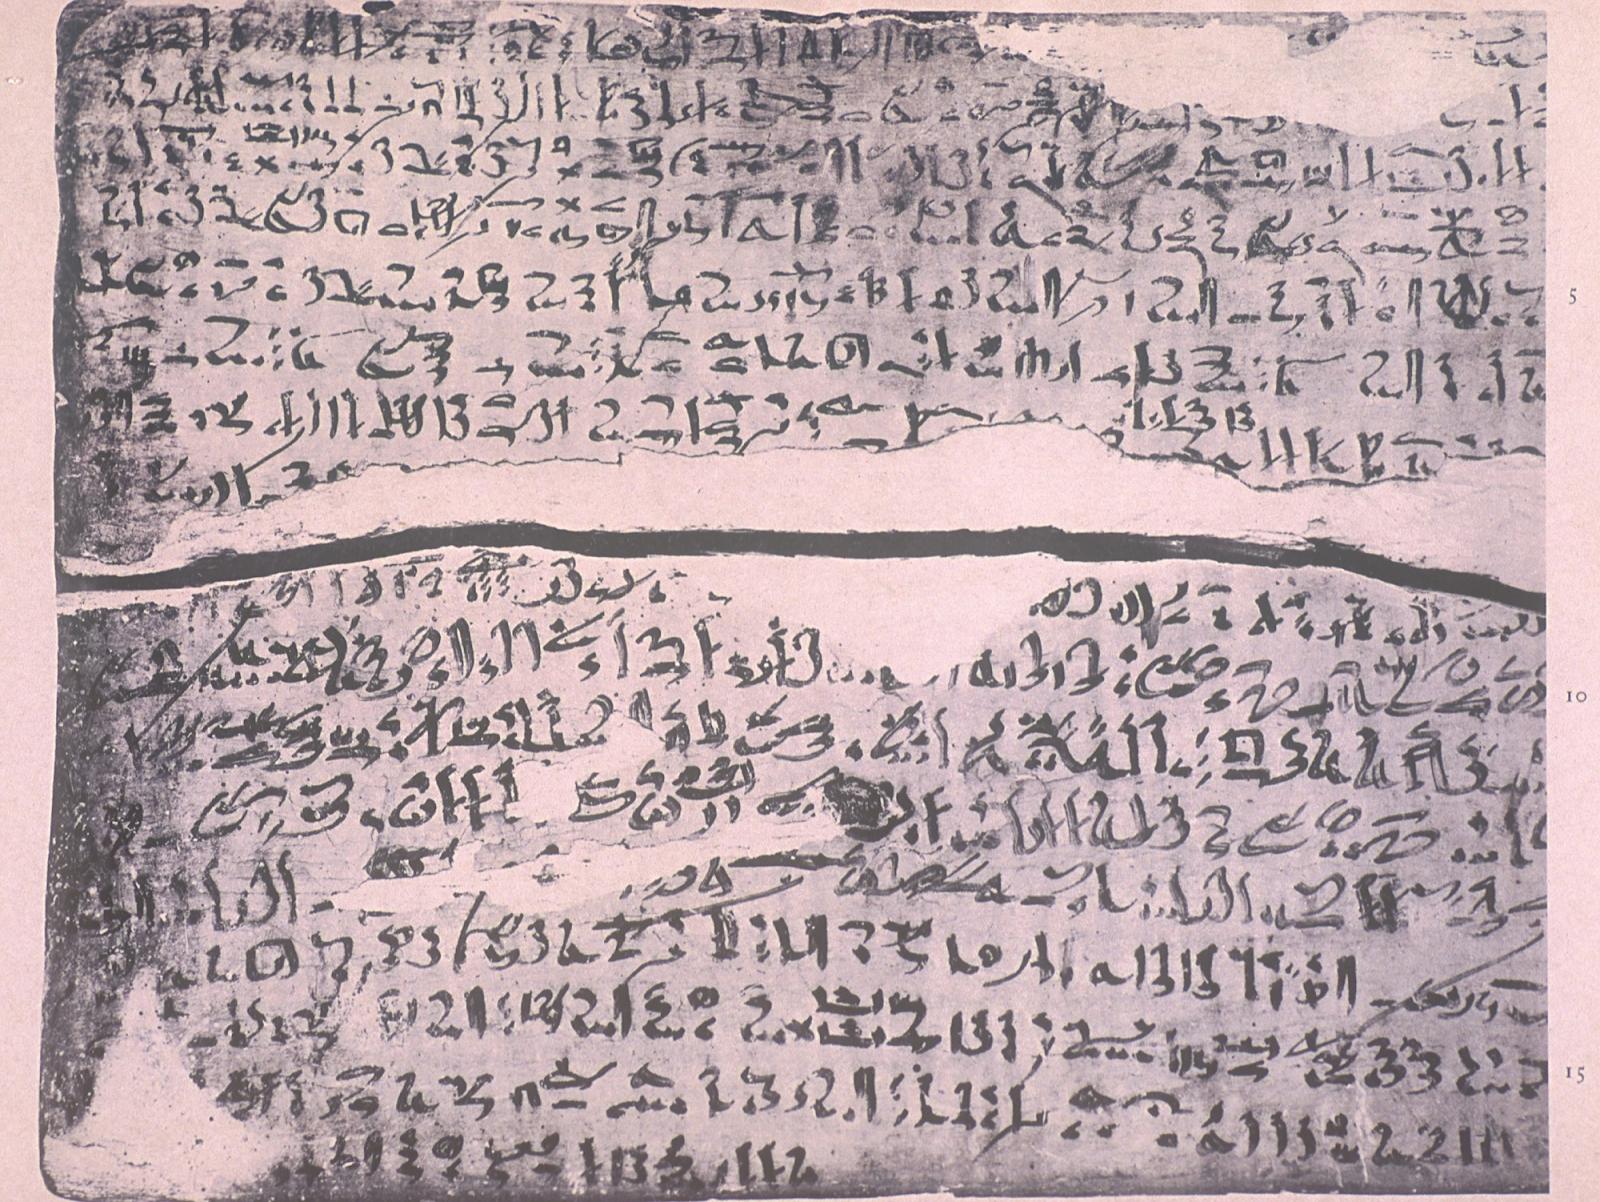 The Carnarvon Tablet I, found in Al Asasif, describes the successful battle of Theban King Kames against the Hyksos.